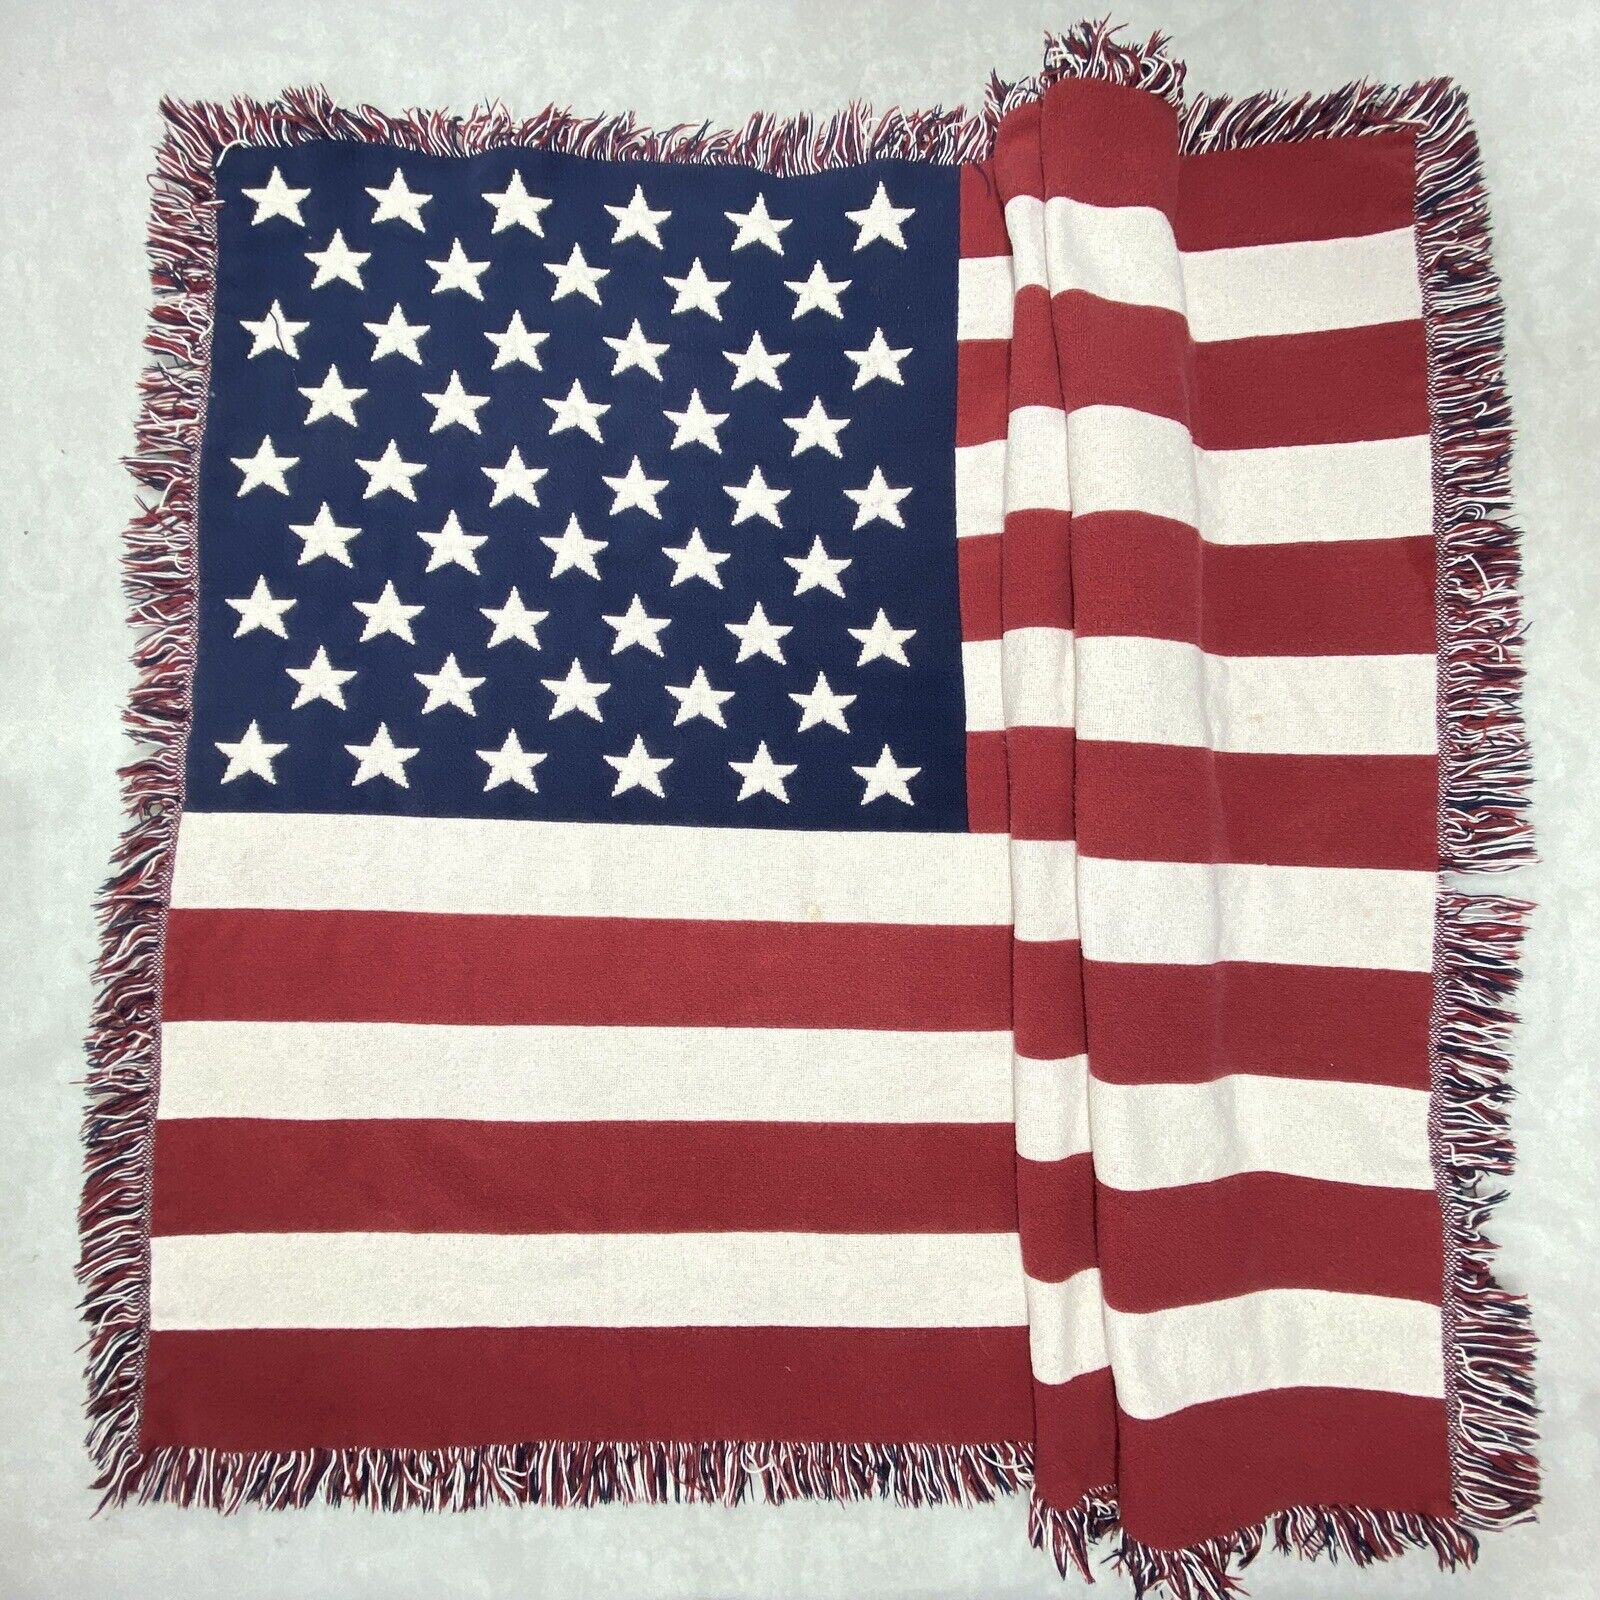 Vintage American Flag Large Tapestry Blanket Woven Throw Cotton 45” X 60”